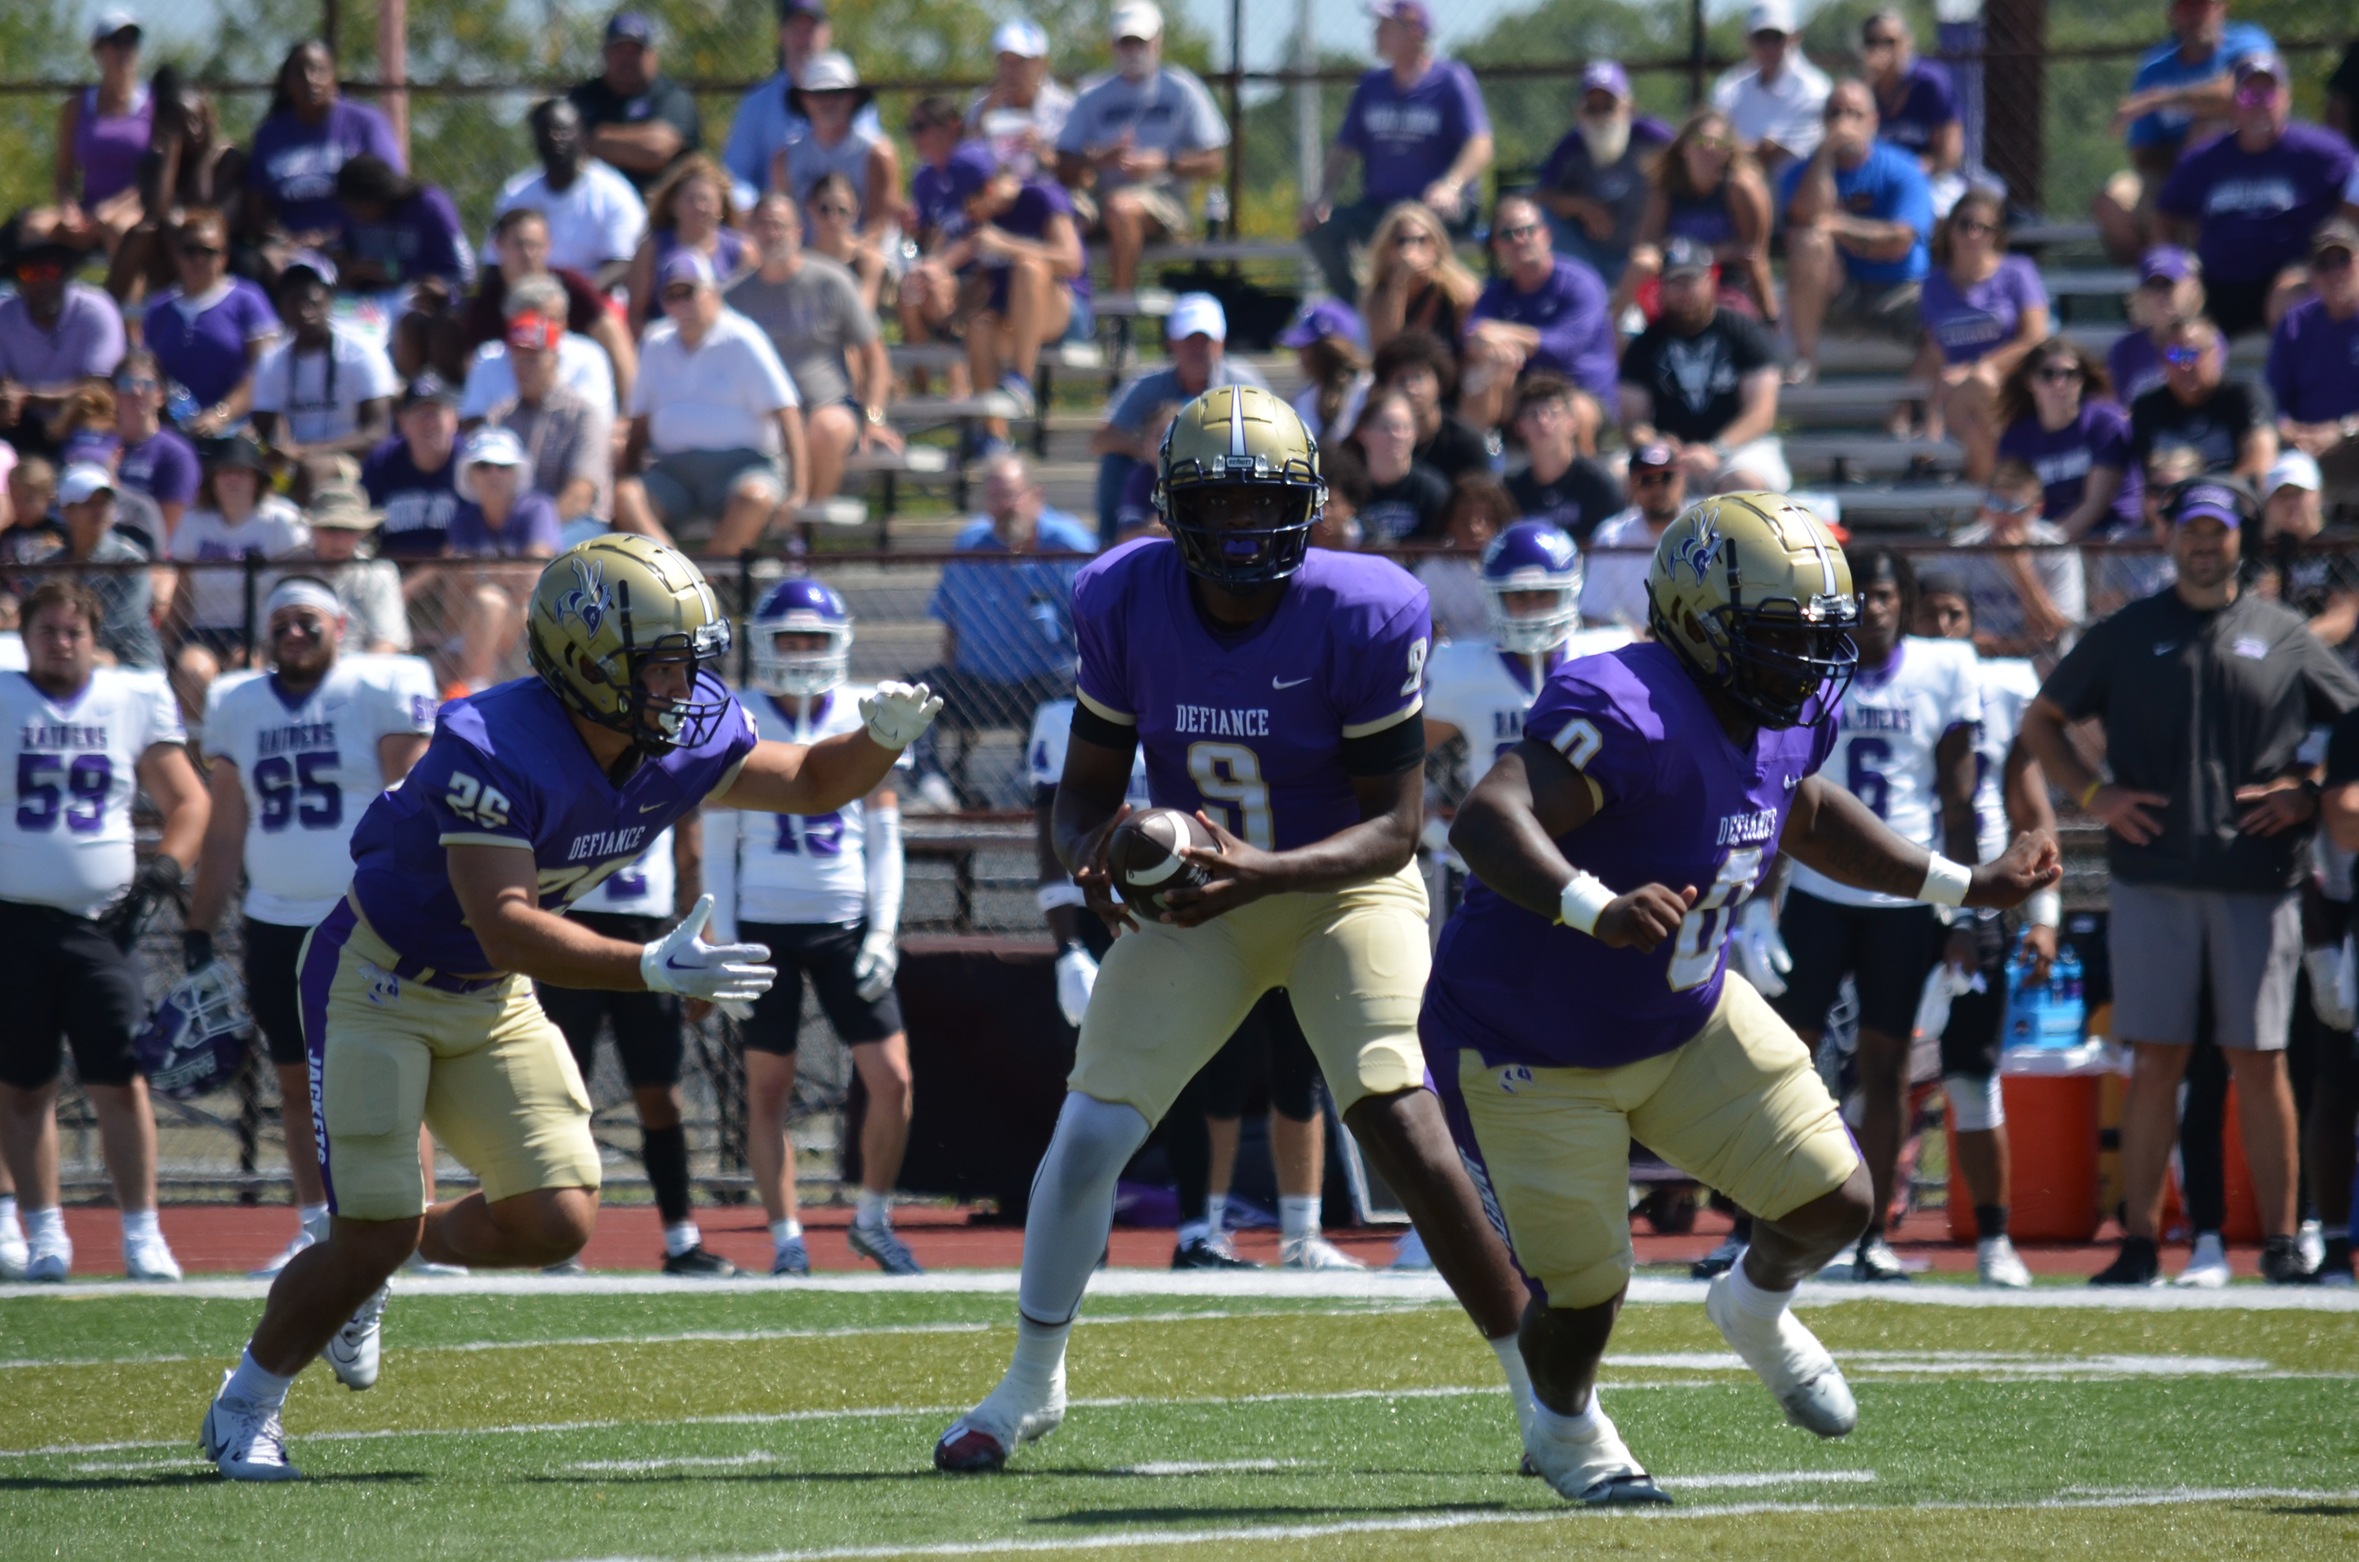 Yellow Jackets drop season opener at home to No. 2 Mount Union